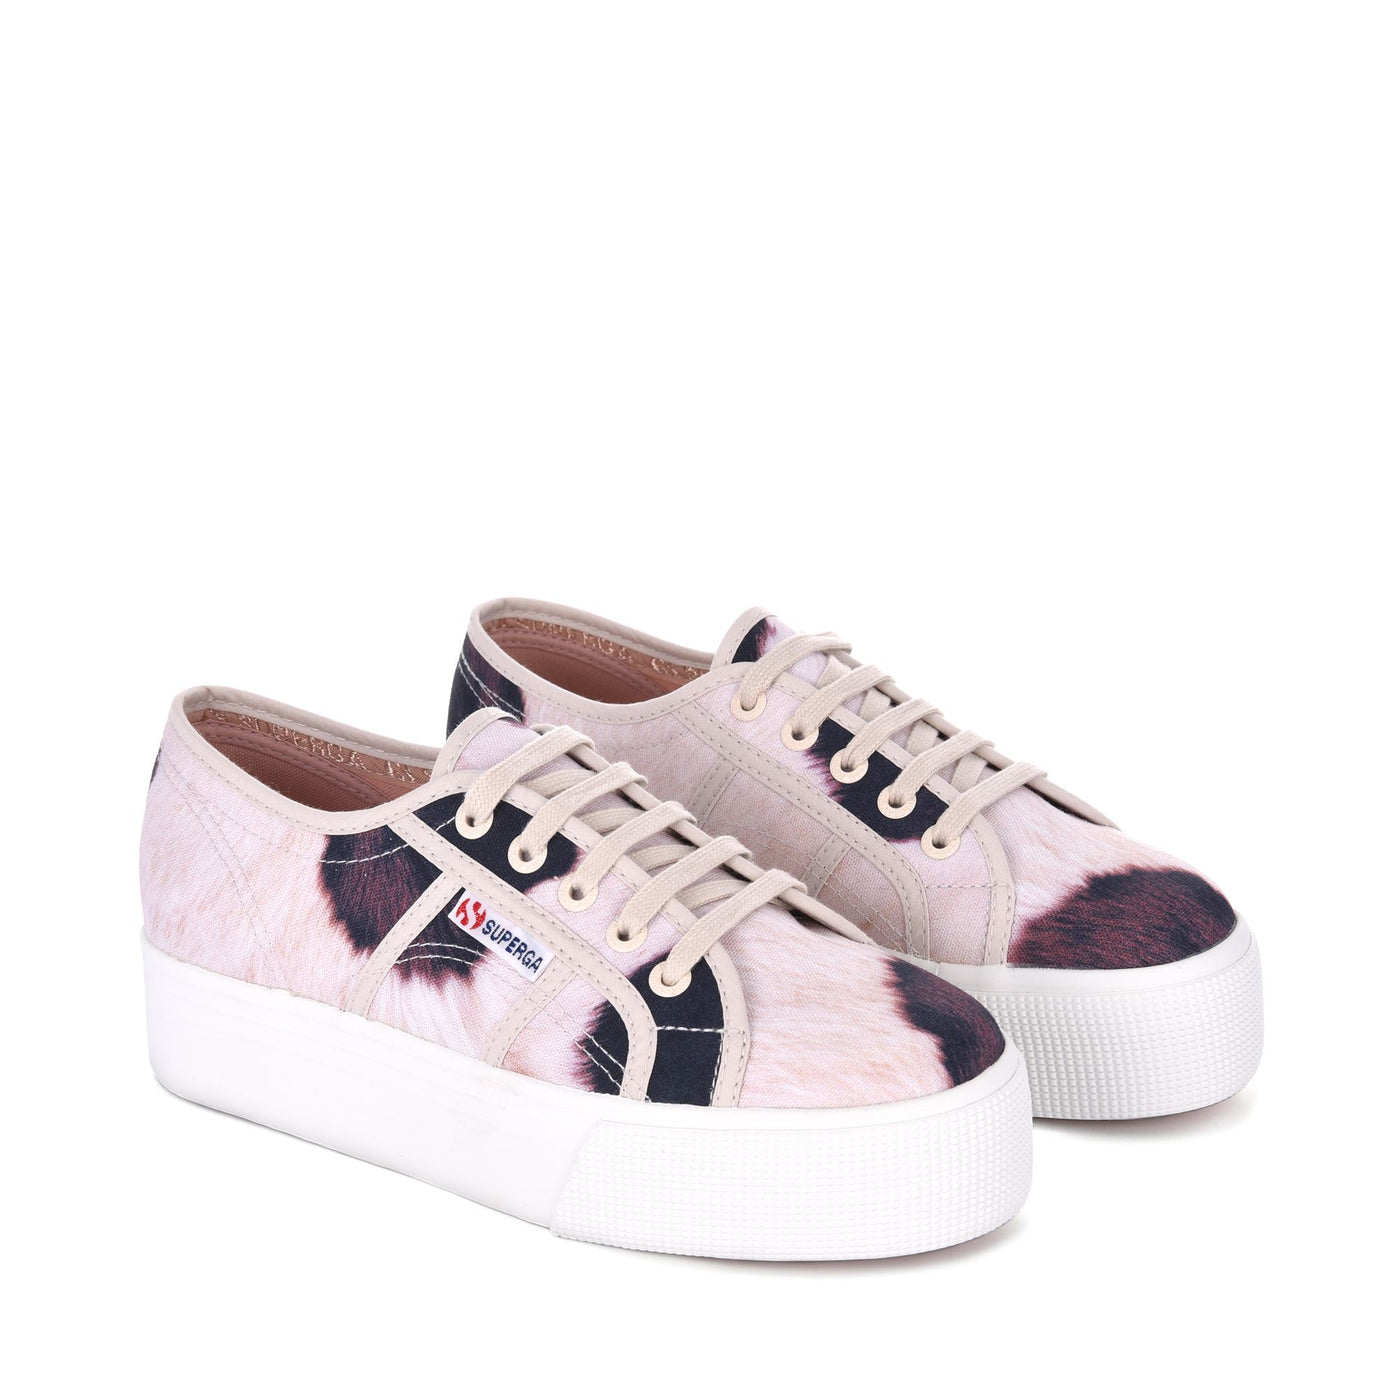 Lady Shoes Woman 2790-FANTASY COTW Wedge BEIGELTSAND-COW | superga Dressed Front (jpg Rgb)	